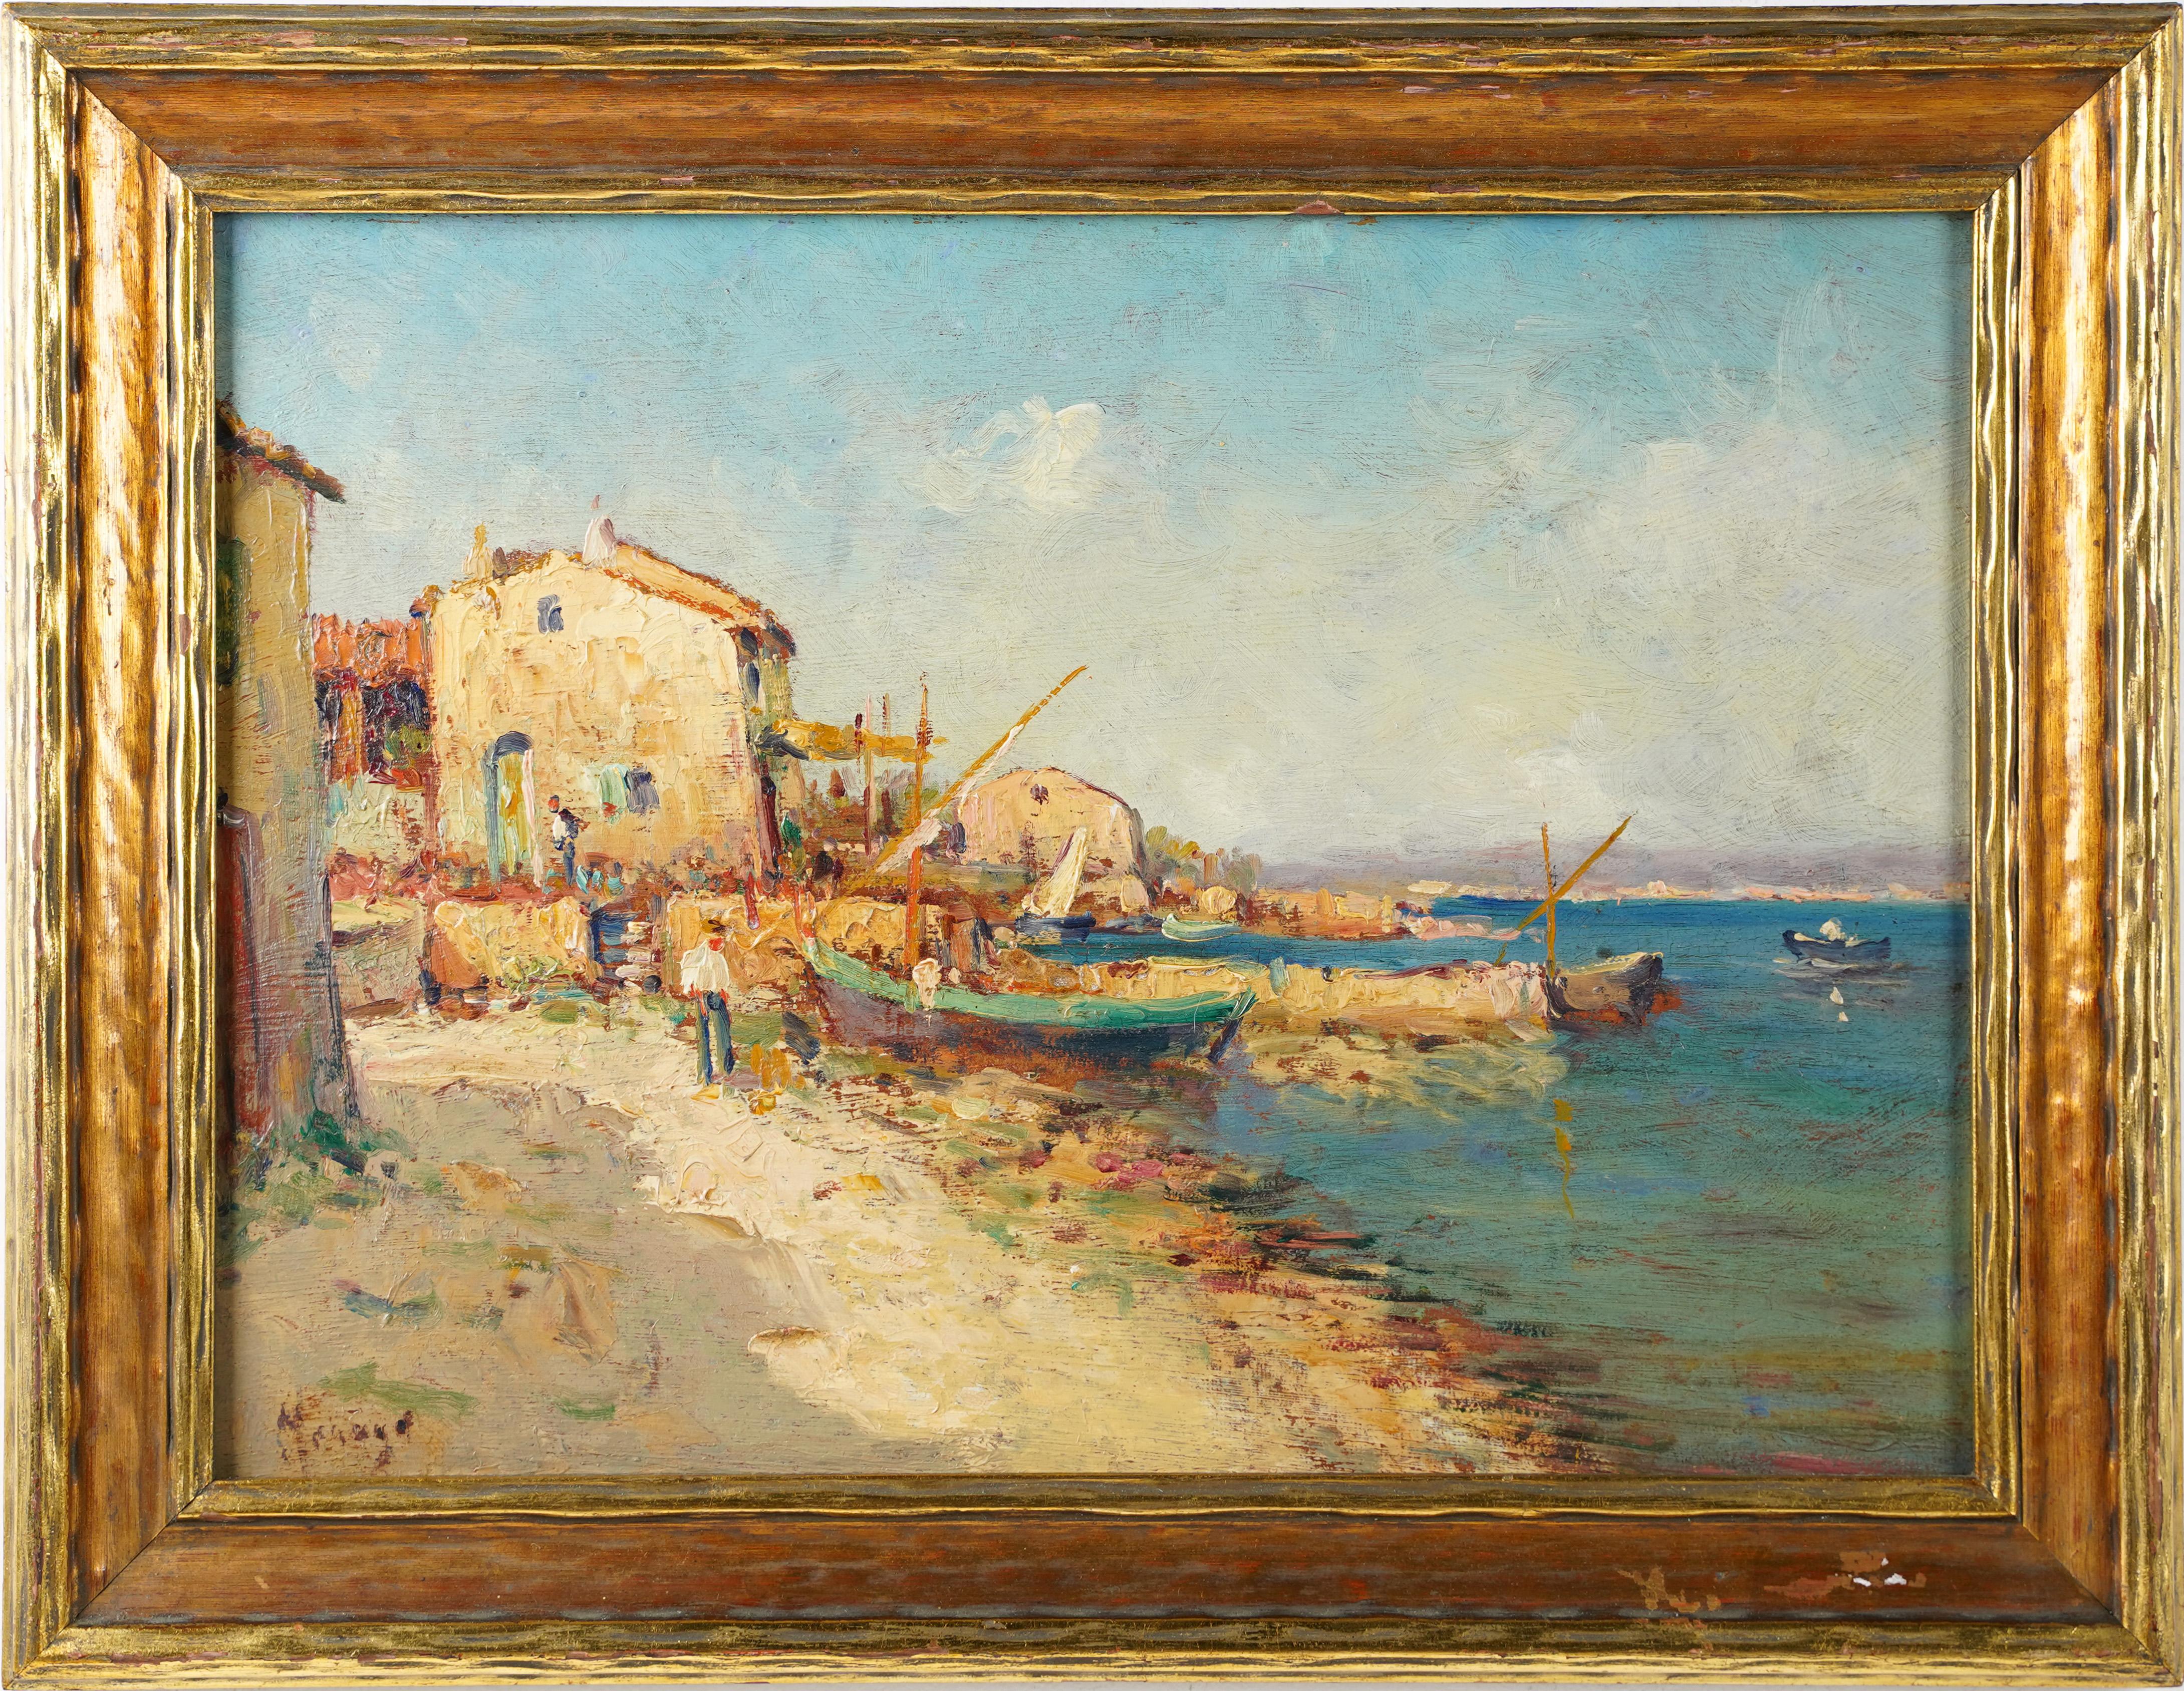 Antique Italian Impressionist Coastal Landscape Signed Framed Oil Painting - Brown Landscape Painting by Unknown